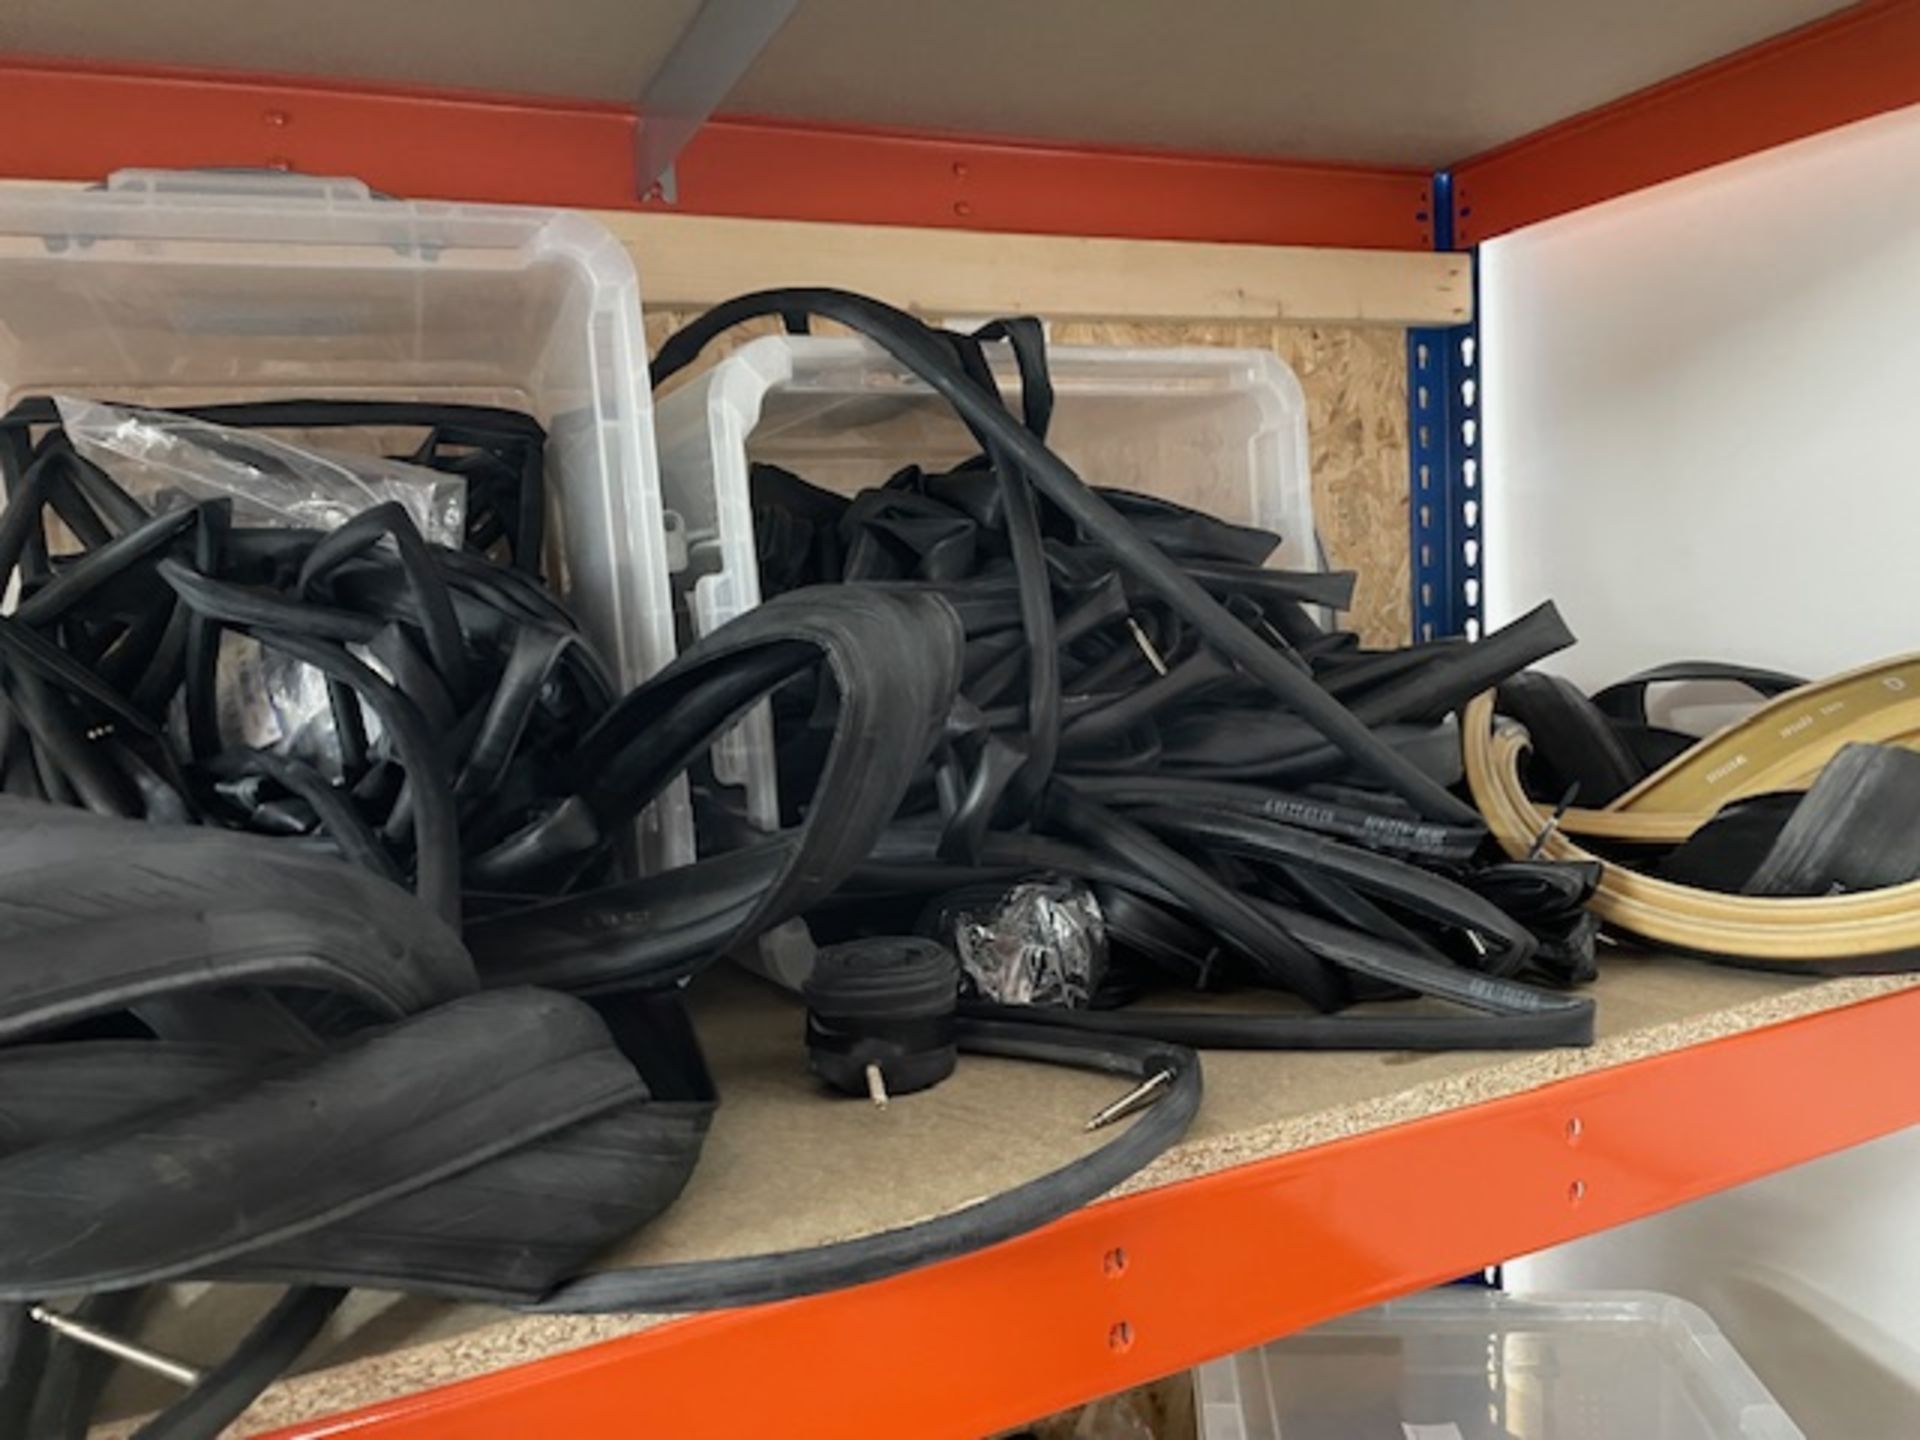 Quantity Innertubes & Tyres (Location: Newport Pagnell. Please Refer to General Notes)